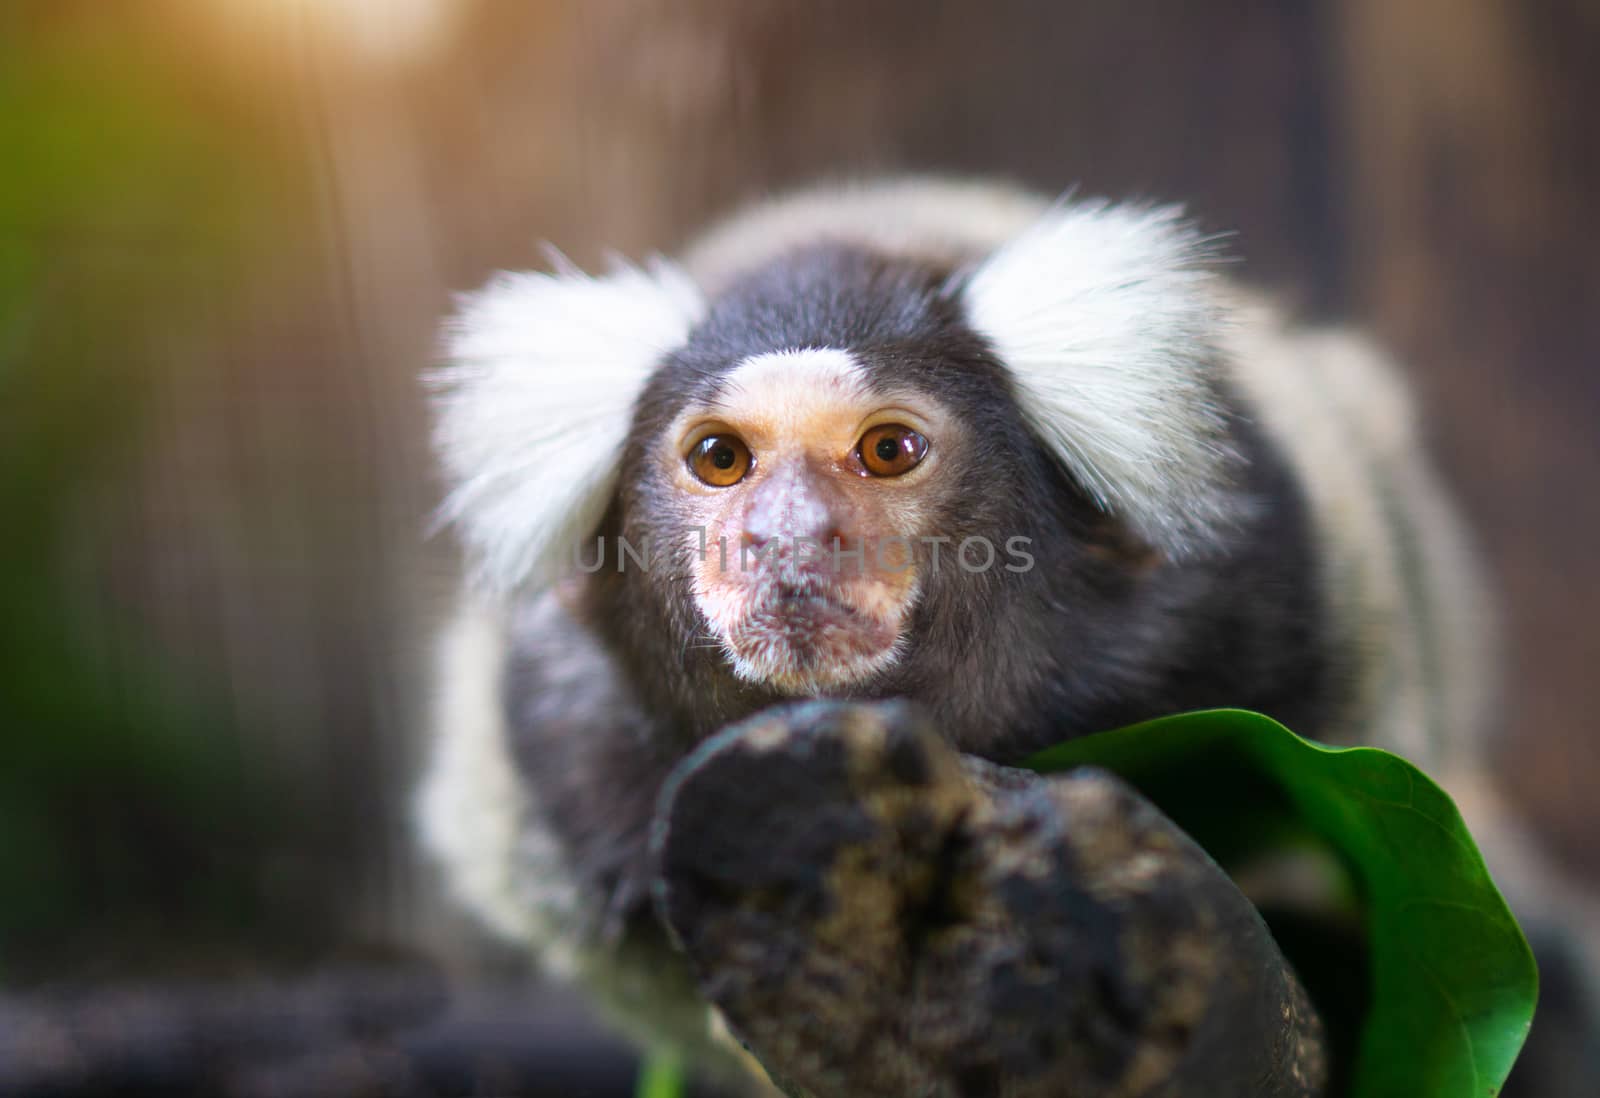 Portrait of white tufted-eared marmoset monkey in the zoo.